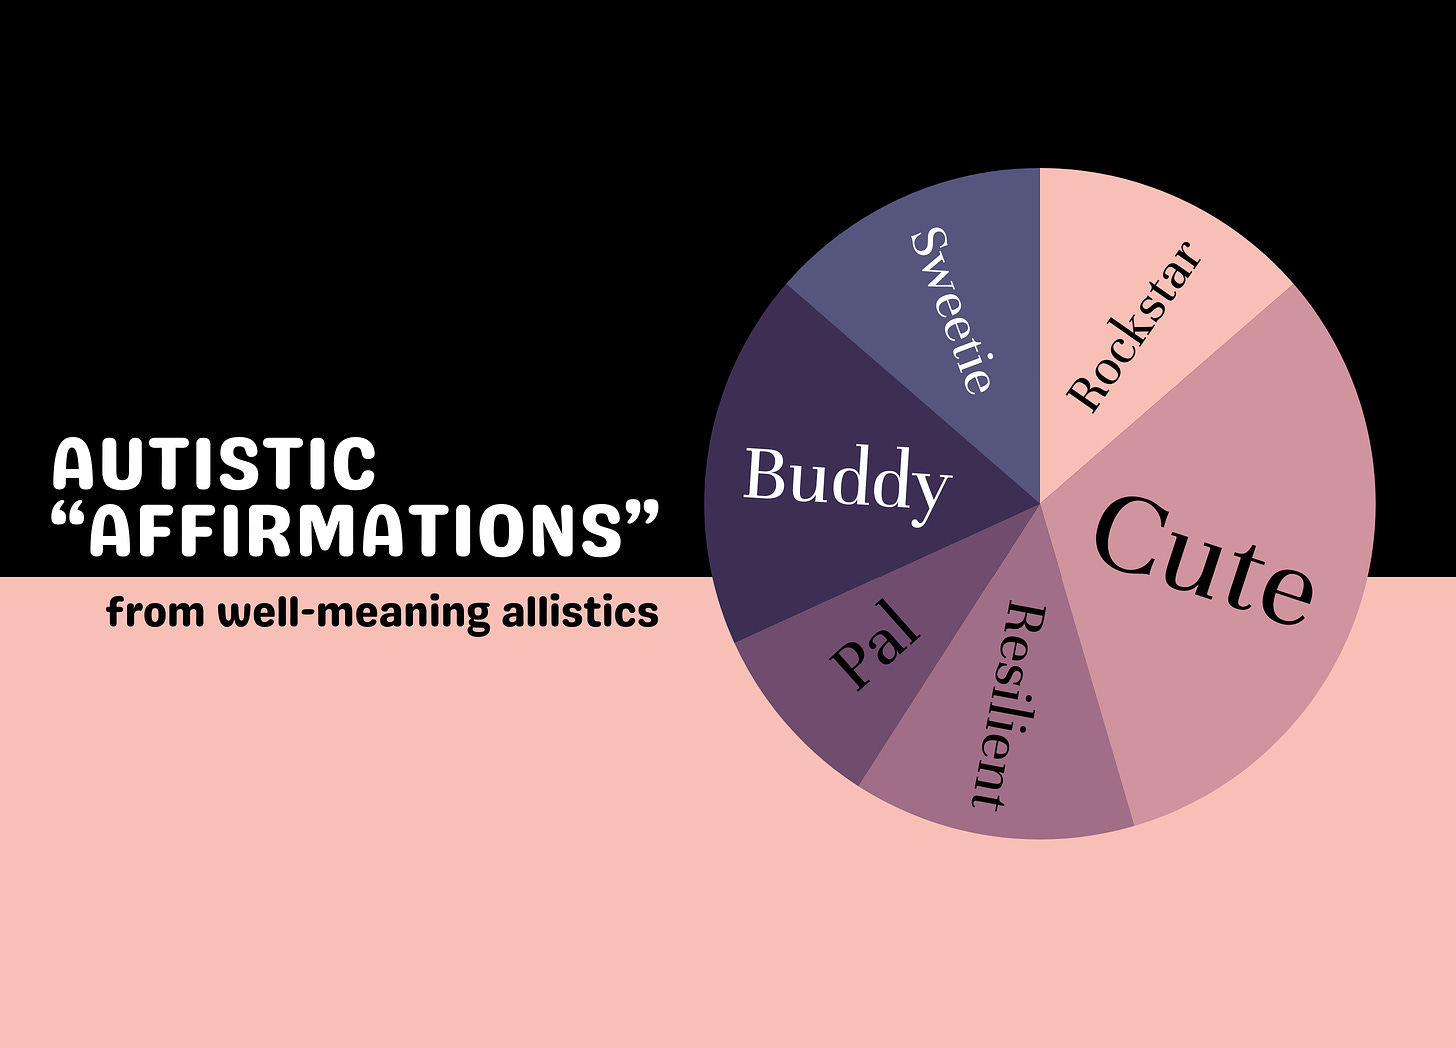 A pink and black graphic with a pie chart of Autistic "affirmations" from well-meaning allistics.